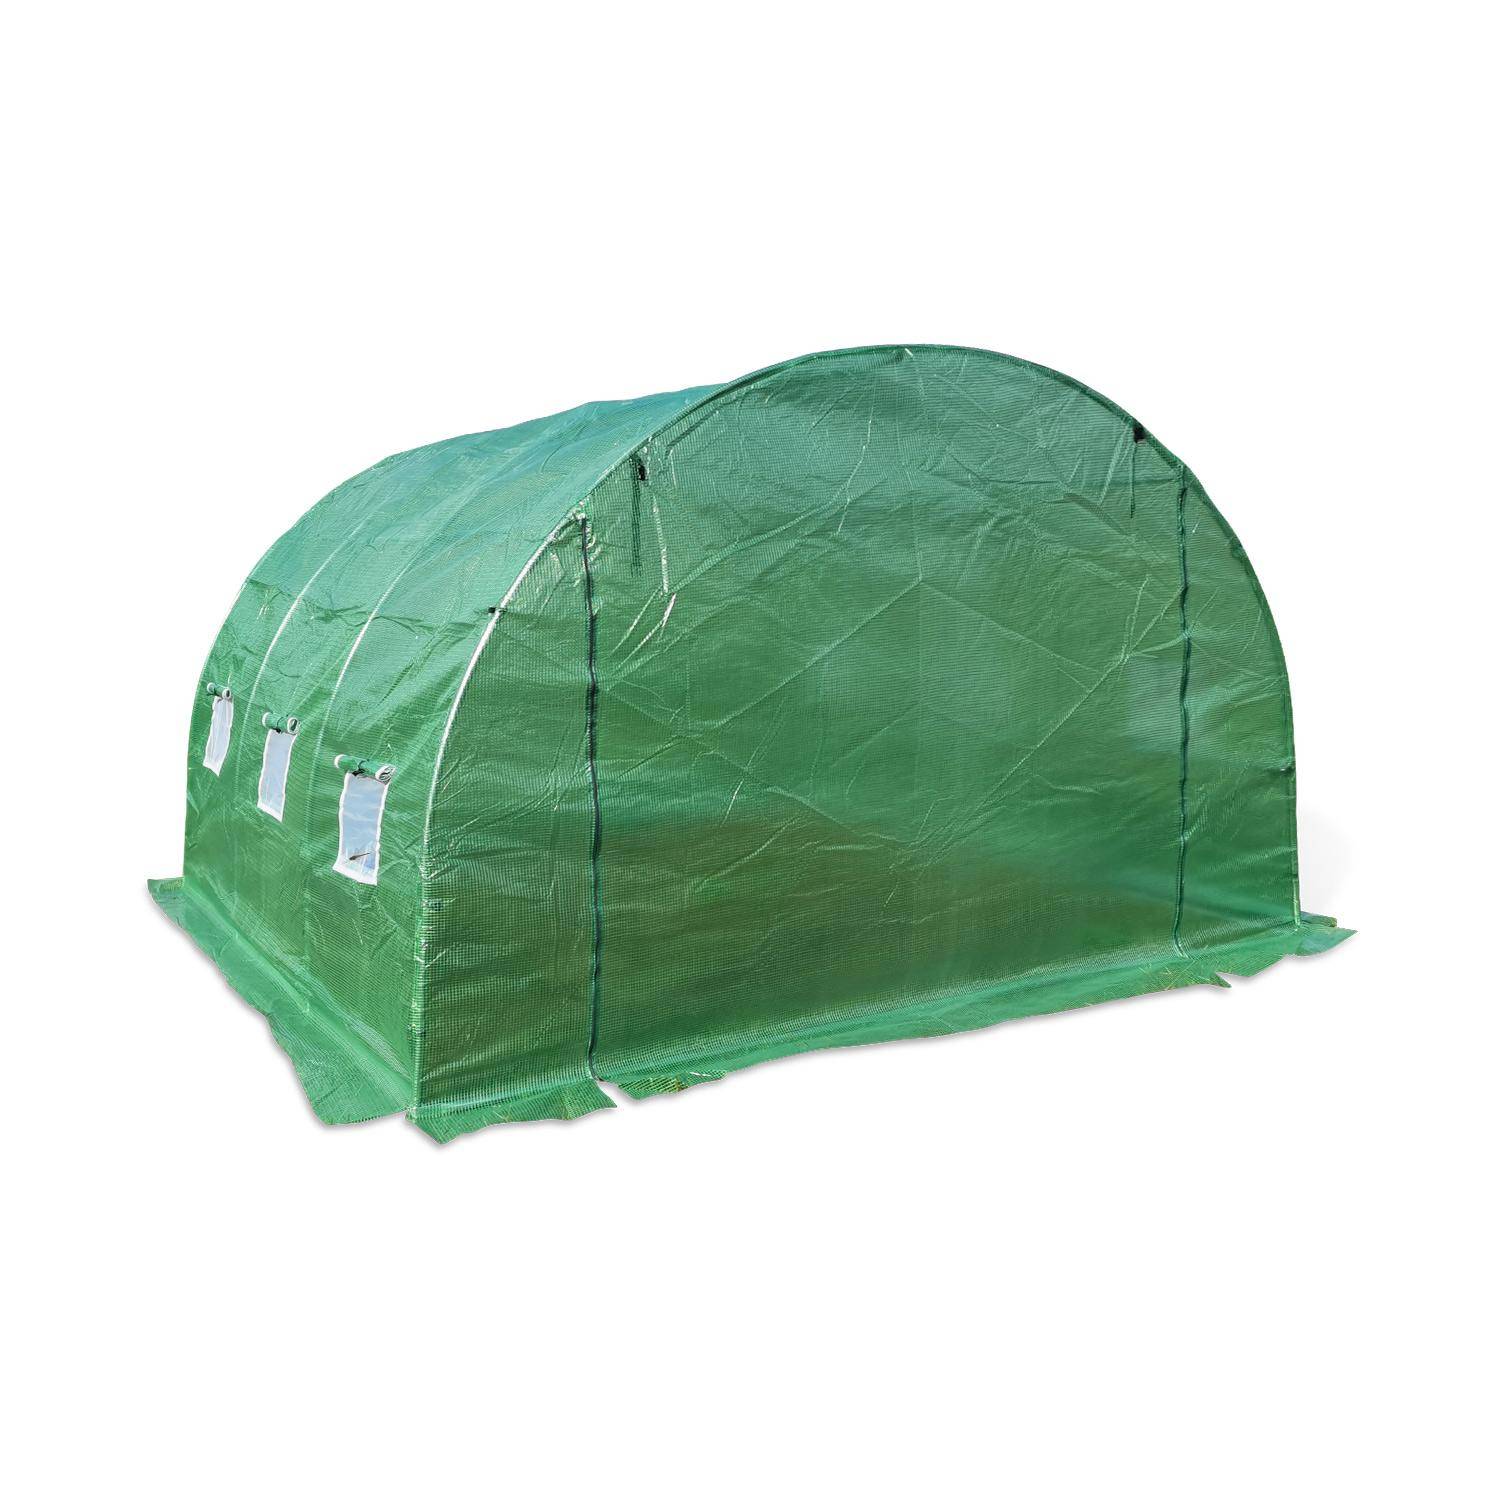 Replacement greenhouse cover - 9 sq metres - Romarin - Green ,sweeek,Photo2